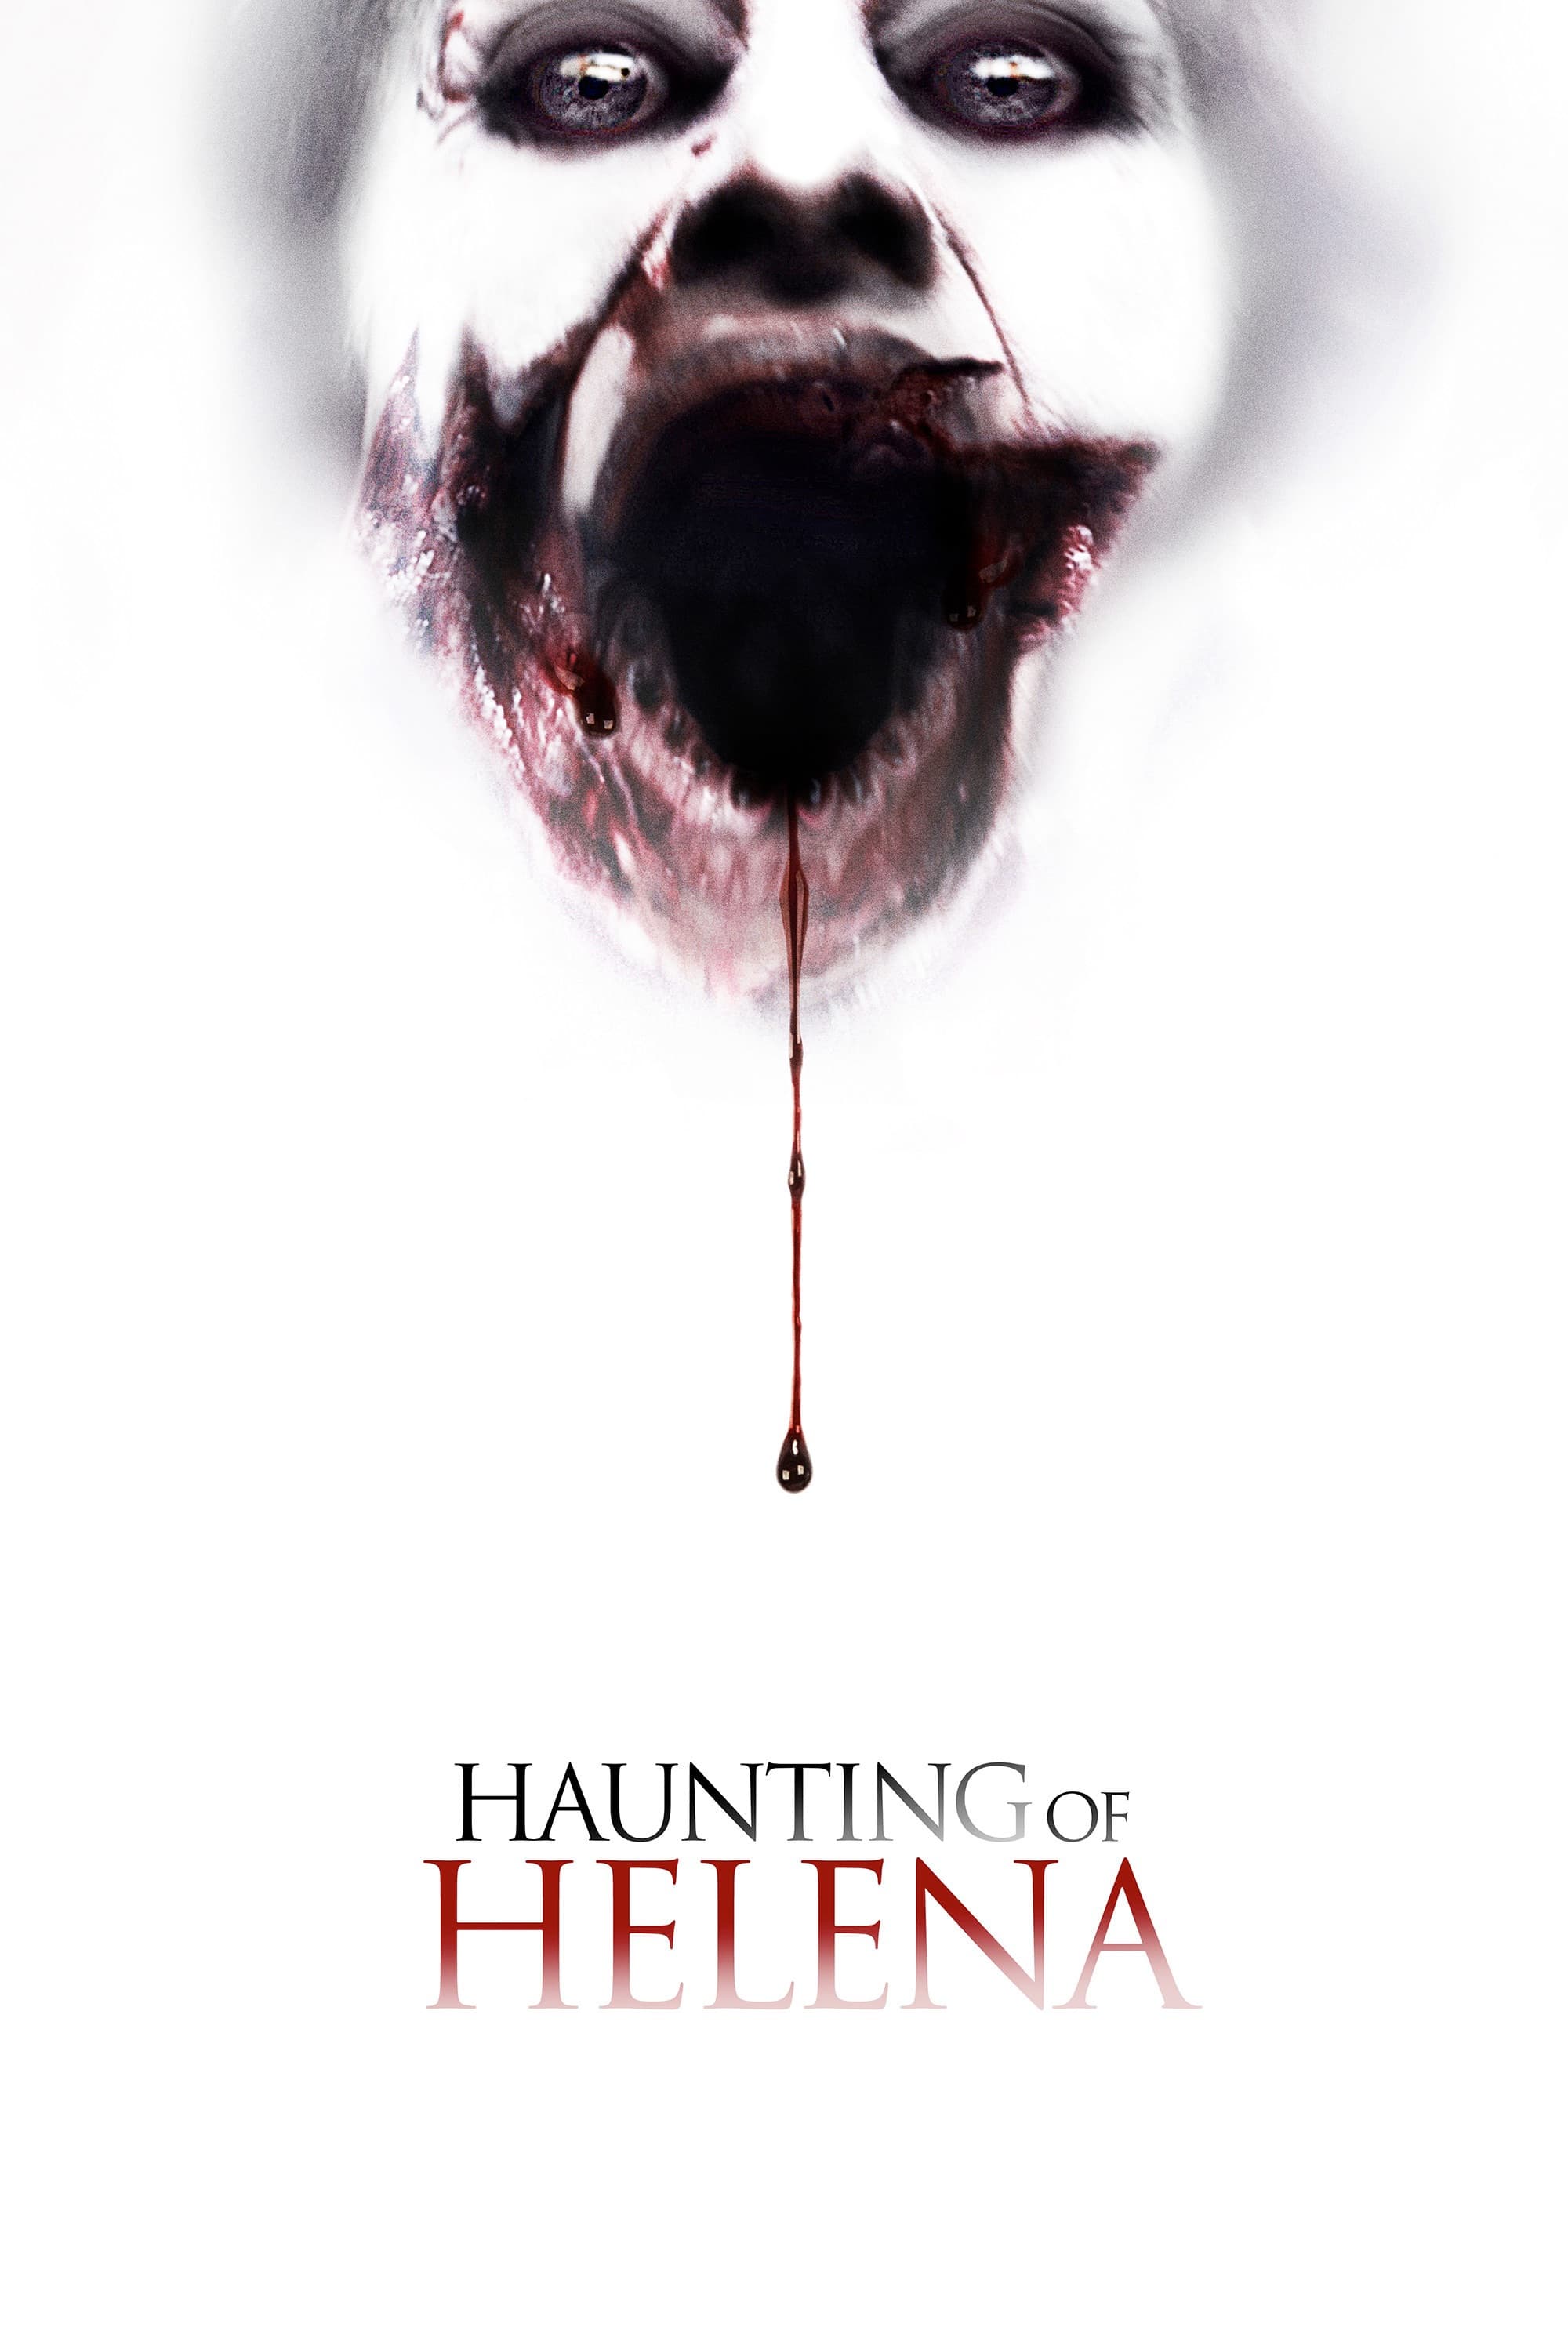 The Haunting of Helena (2013)